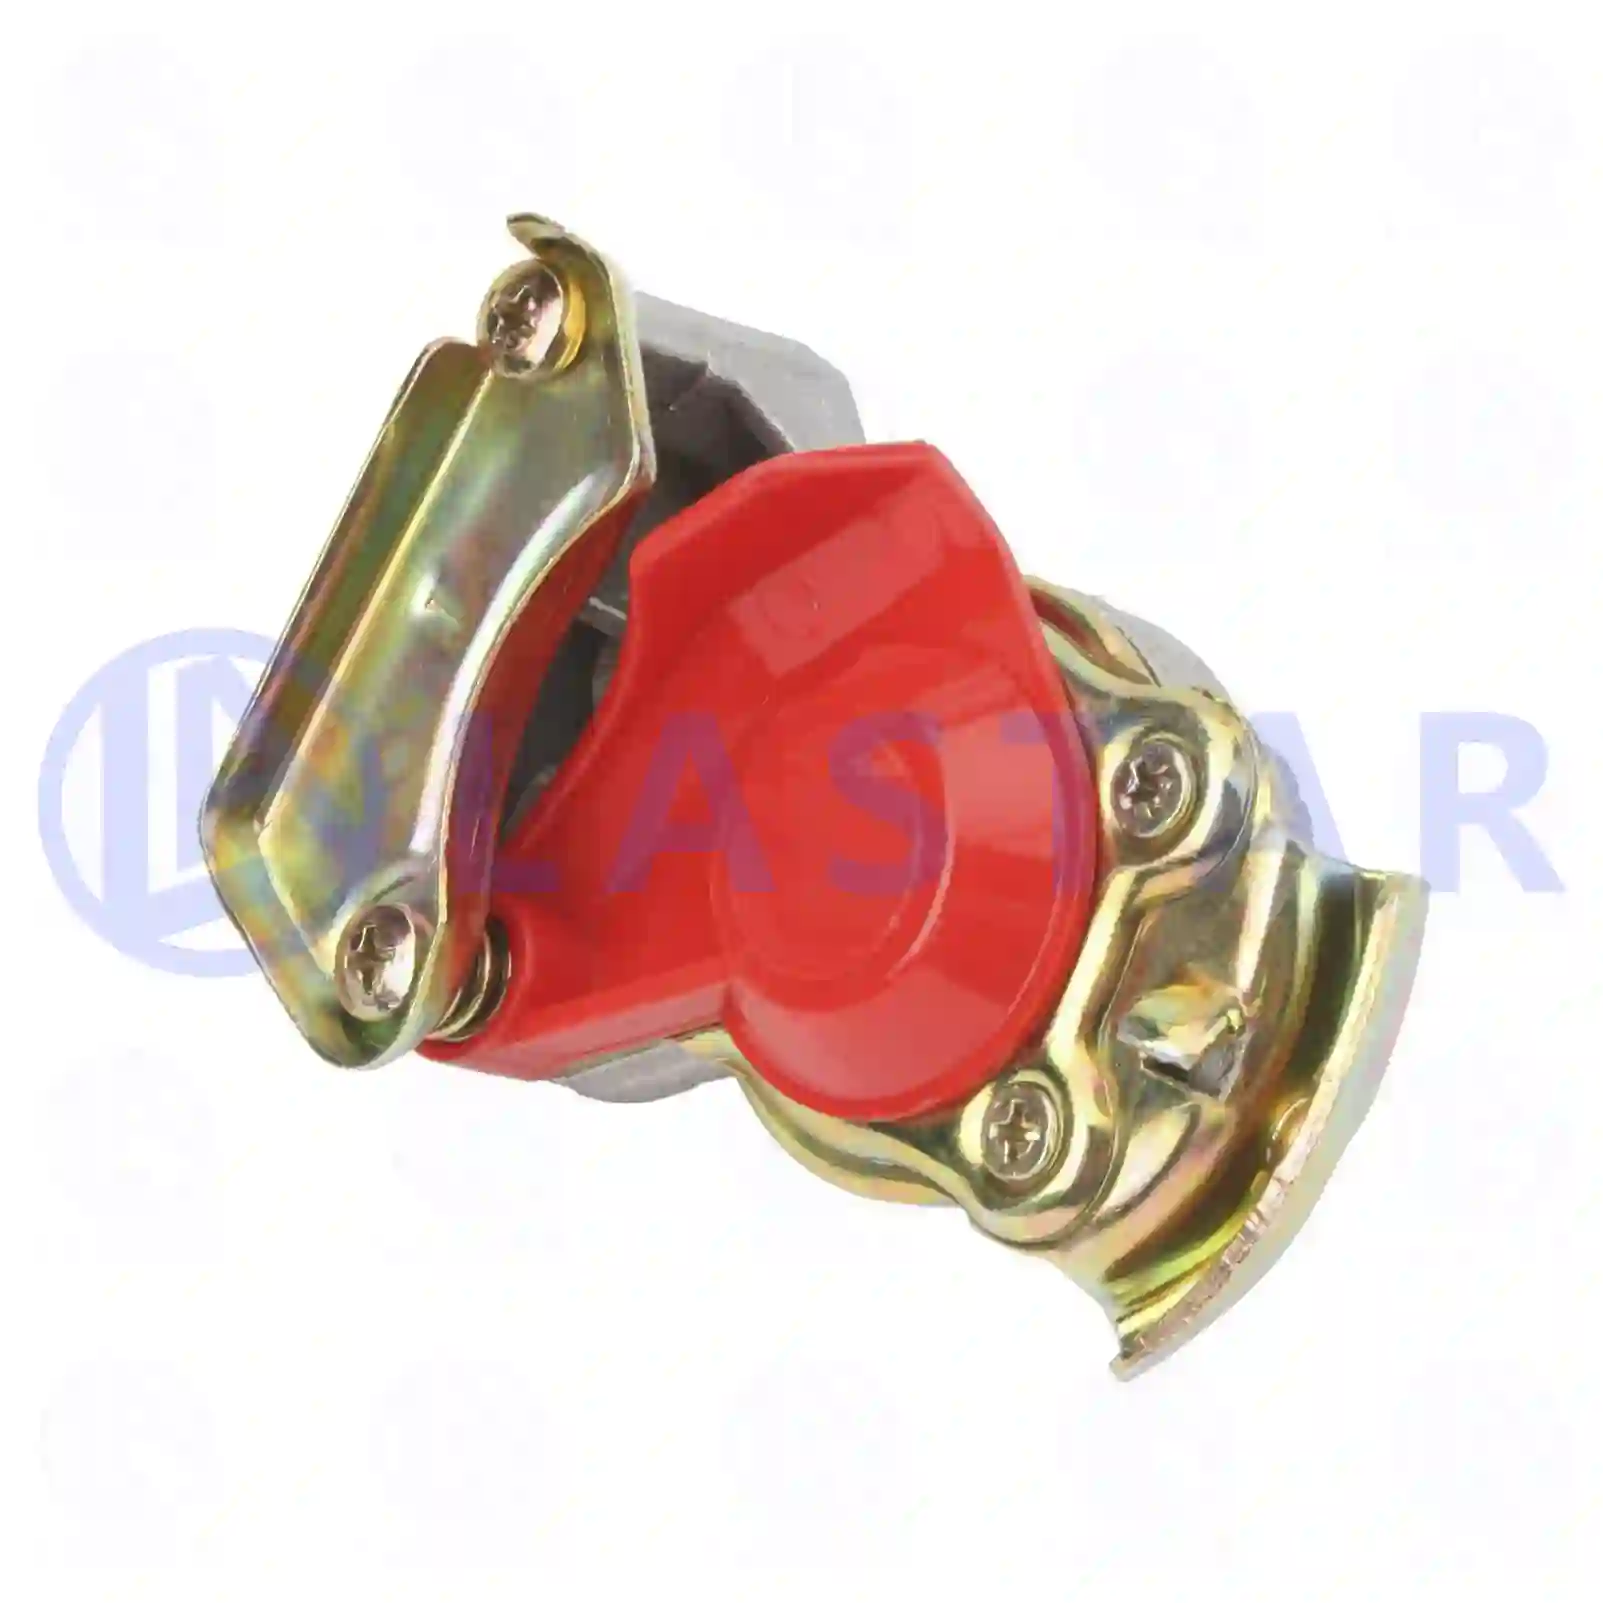 Palm coupling, red lid, 77714415, 0218240700, 0109912, 109912, 200234, 02519879, 2519879, 09453830, 945383, 9453830, 88512206003, 462005, 8283702000 ||  77714415 Lastar Spare Part | Truck Spare Parts, Auotomotive Spare Parts Palm coupling, red lid, 77714415, 0218240700, 0109912, 109912, 200234, 02519879, 2519879, 09453830, 945383, 9453830, 88512206003, 462005, 8283702000 ||  77714415 Lastar Spare Part | Truck Spare Parts, Auotomotive Spare Parts